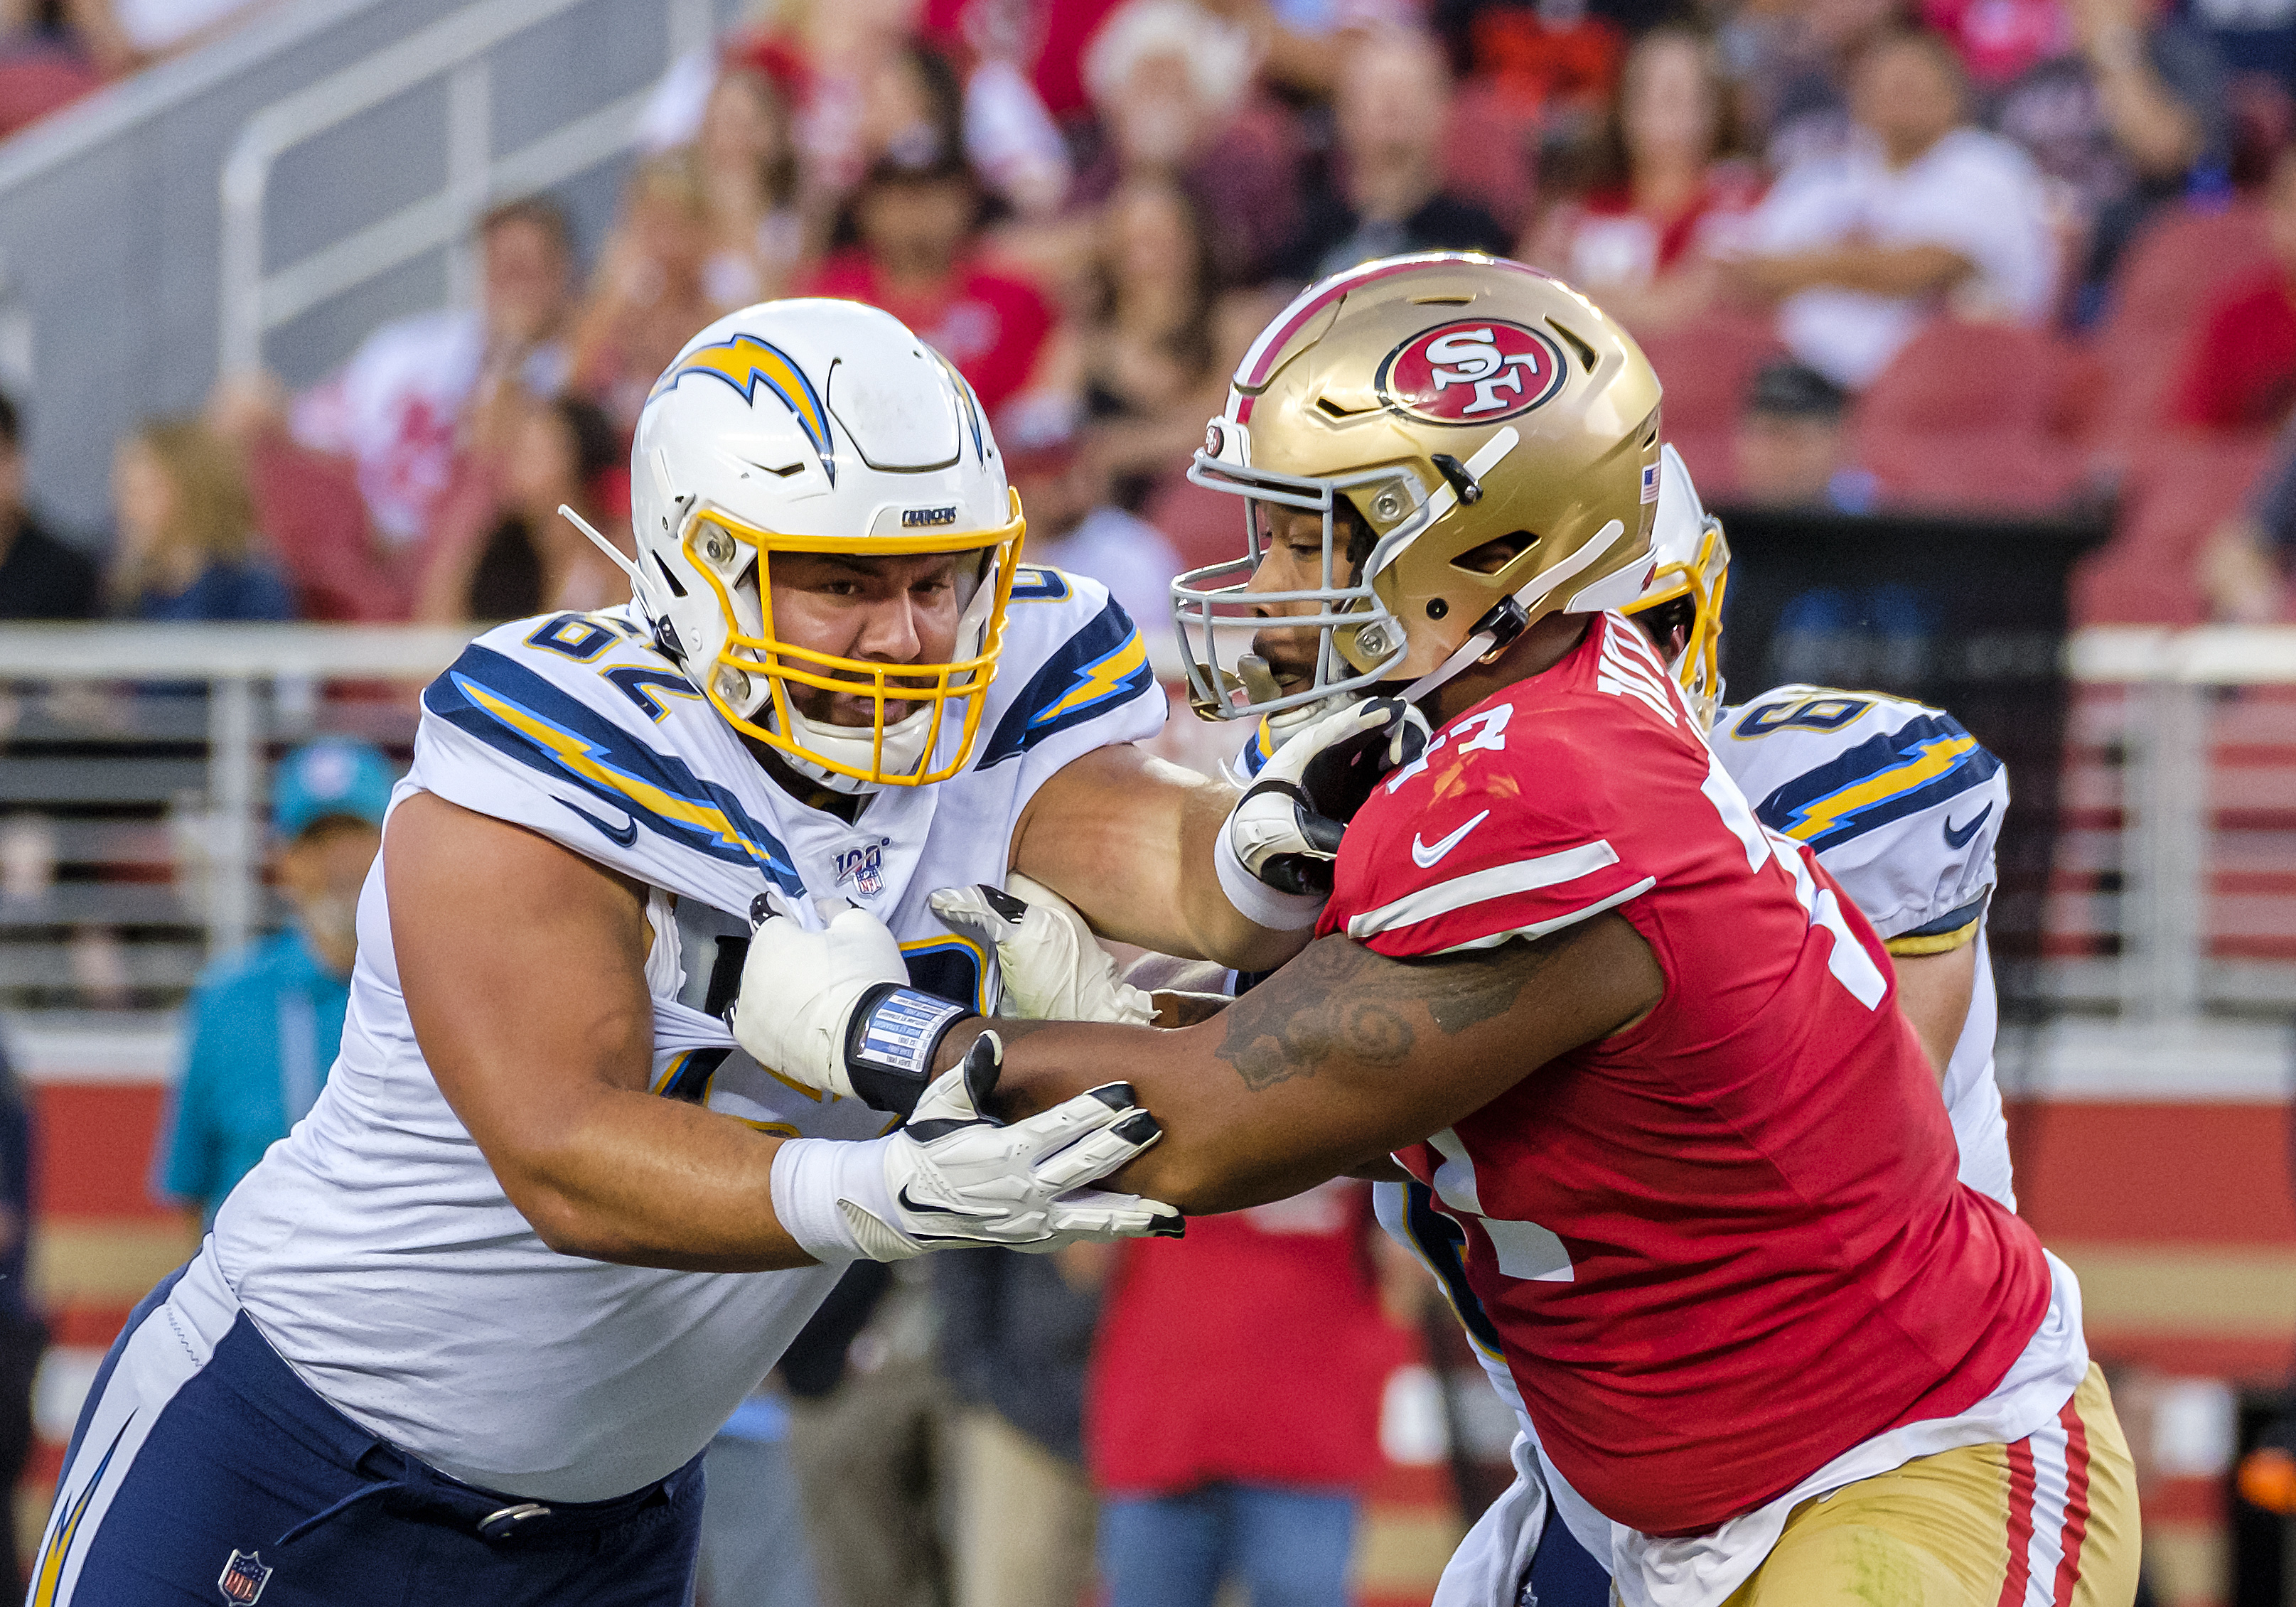 Chargers vs. 49ers